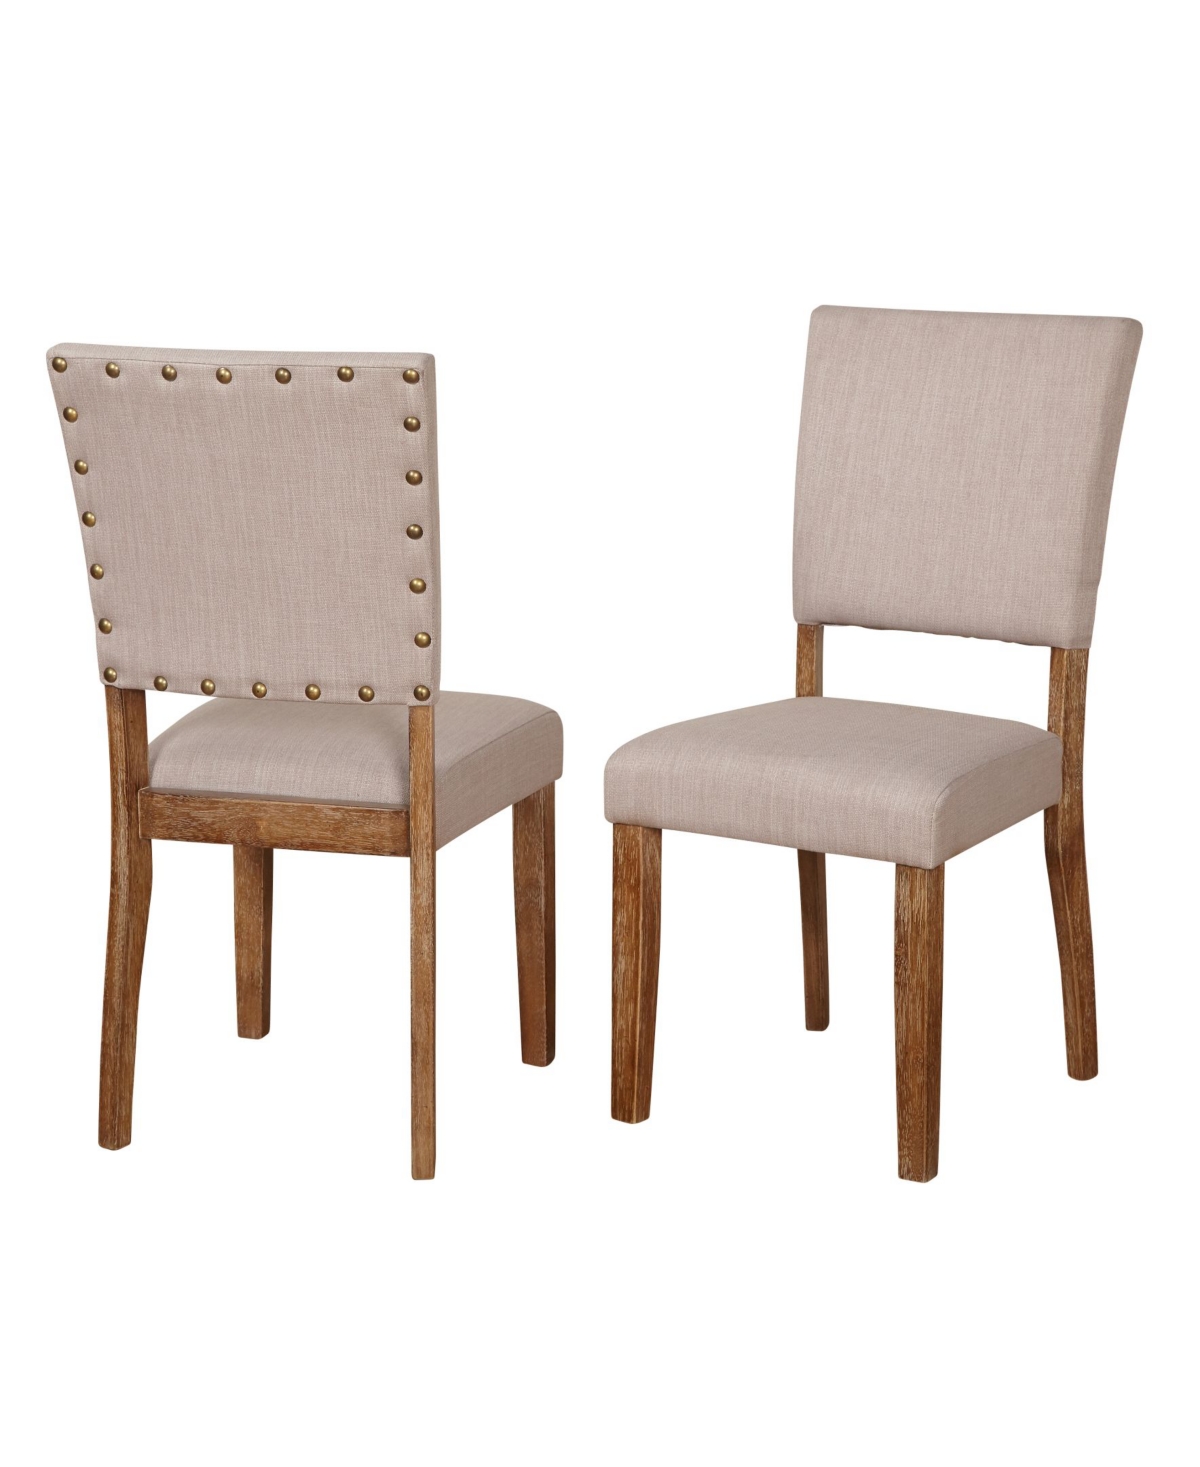 Buylateral Provence Nailhead Parson Dining Chairs Set of 2